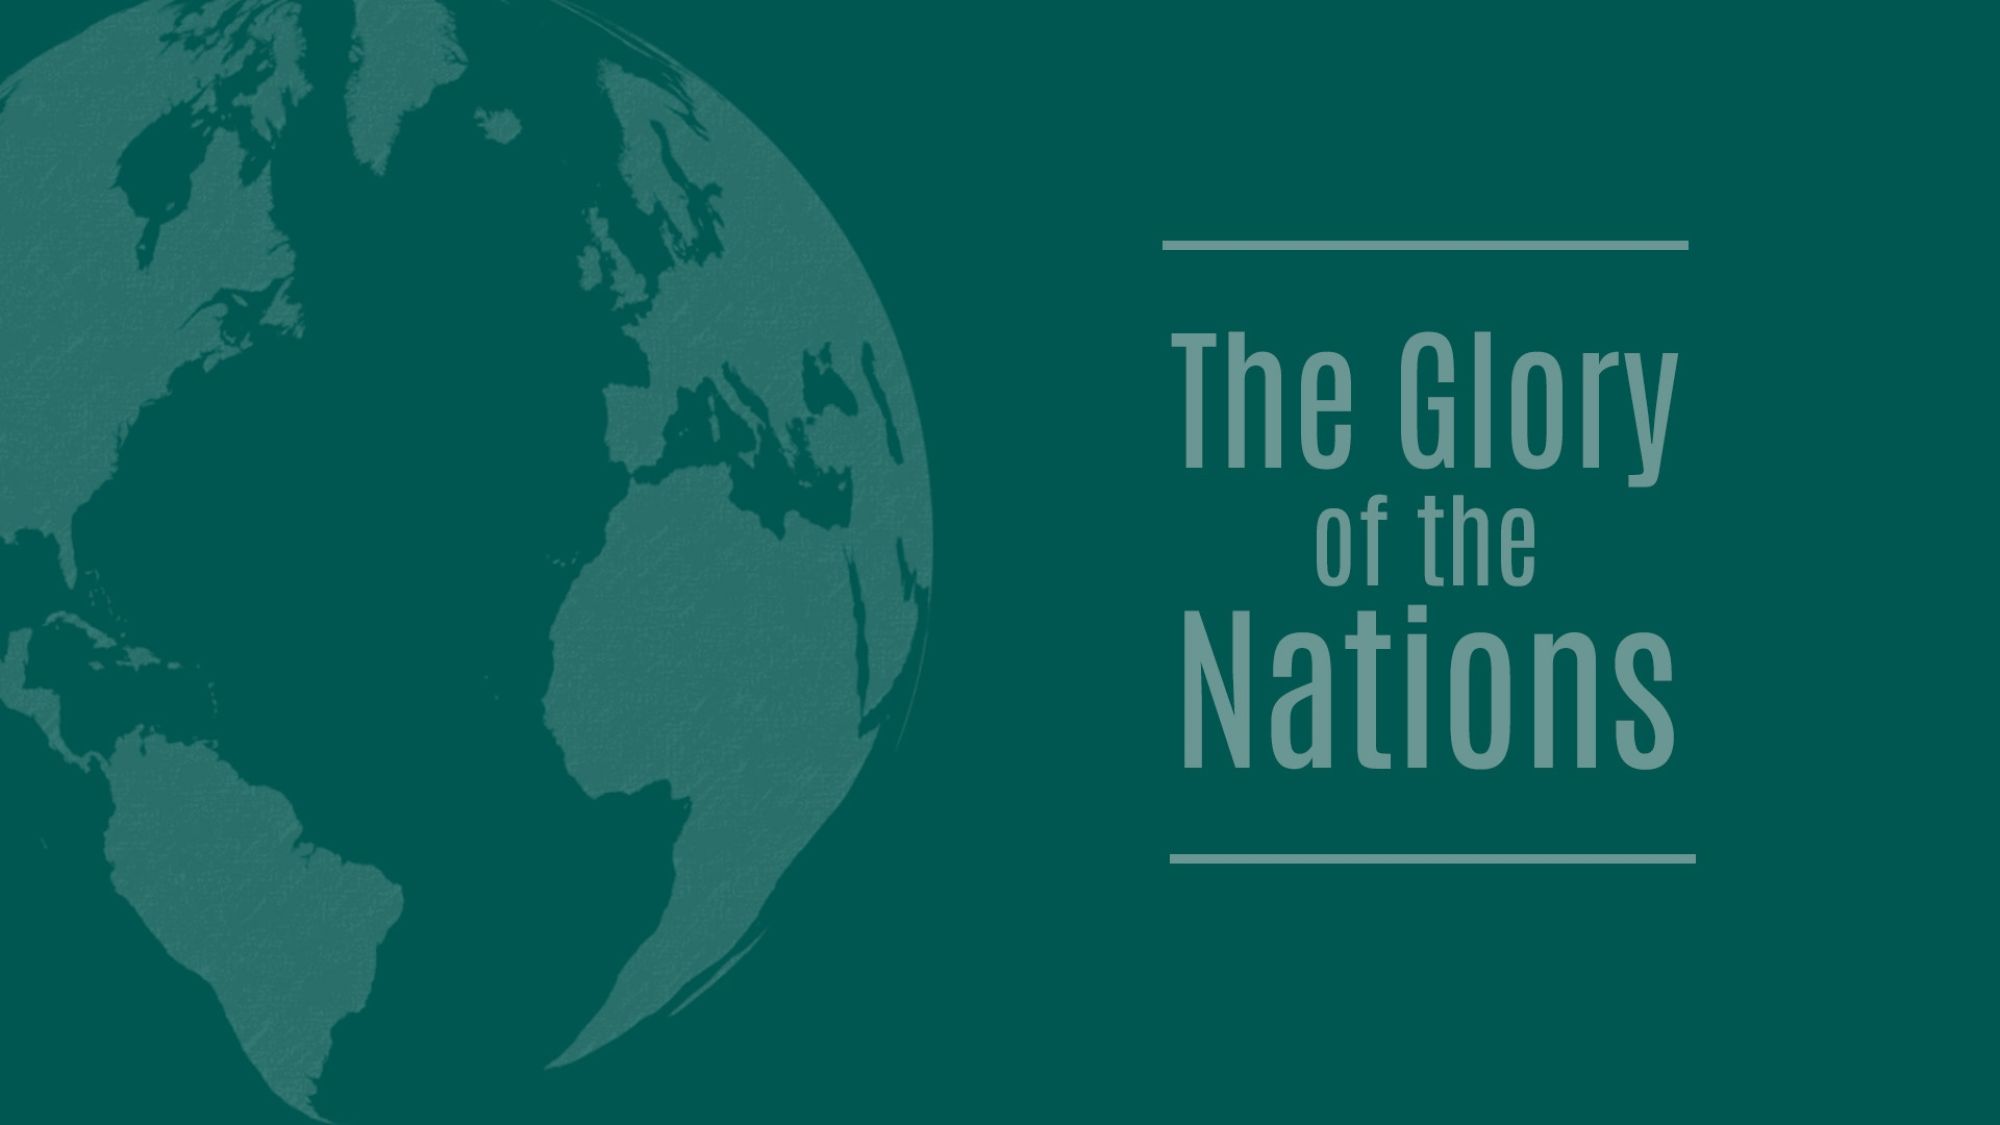 The Glory of the Nations